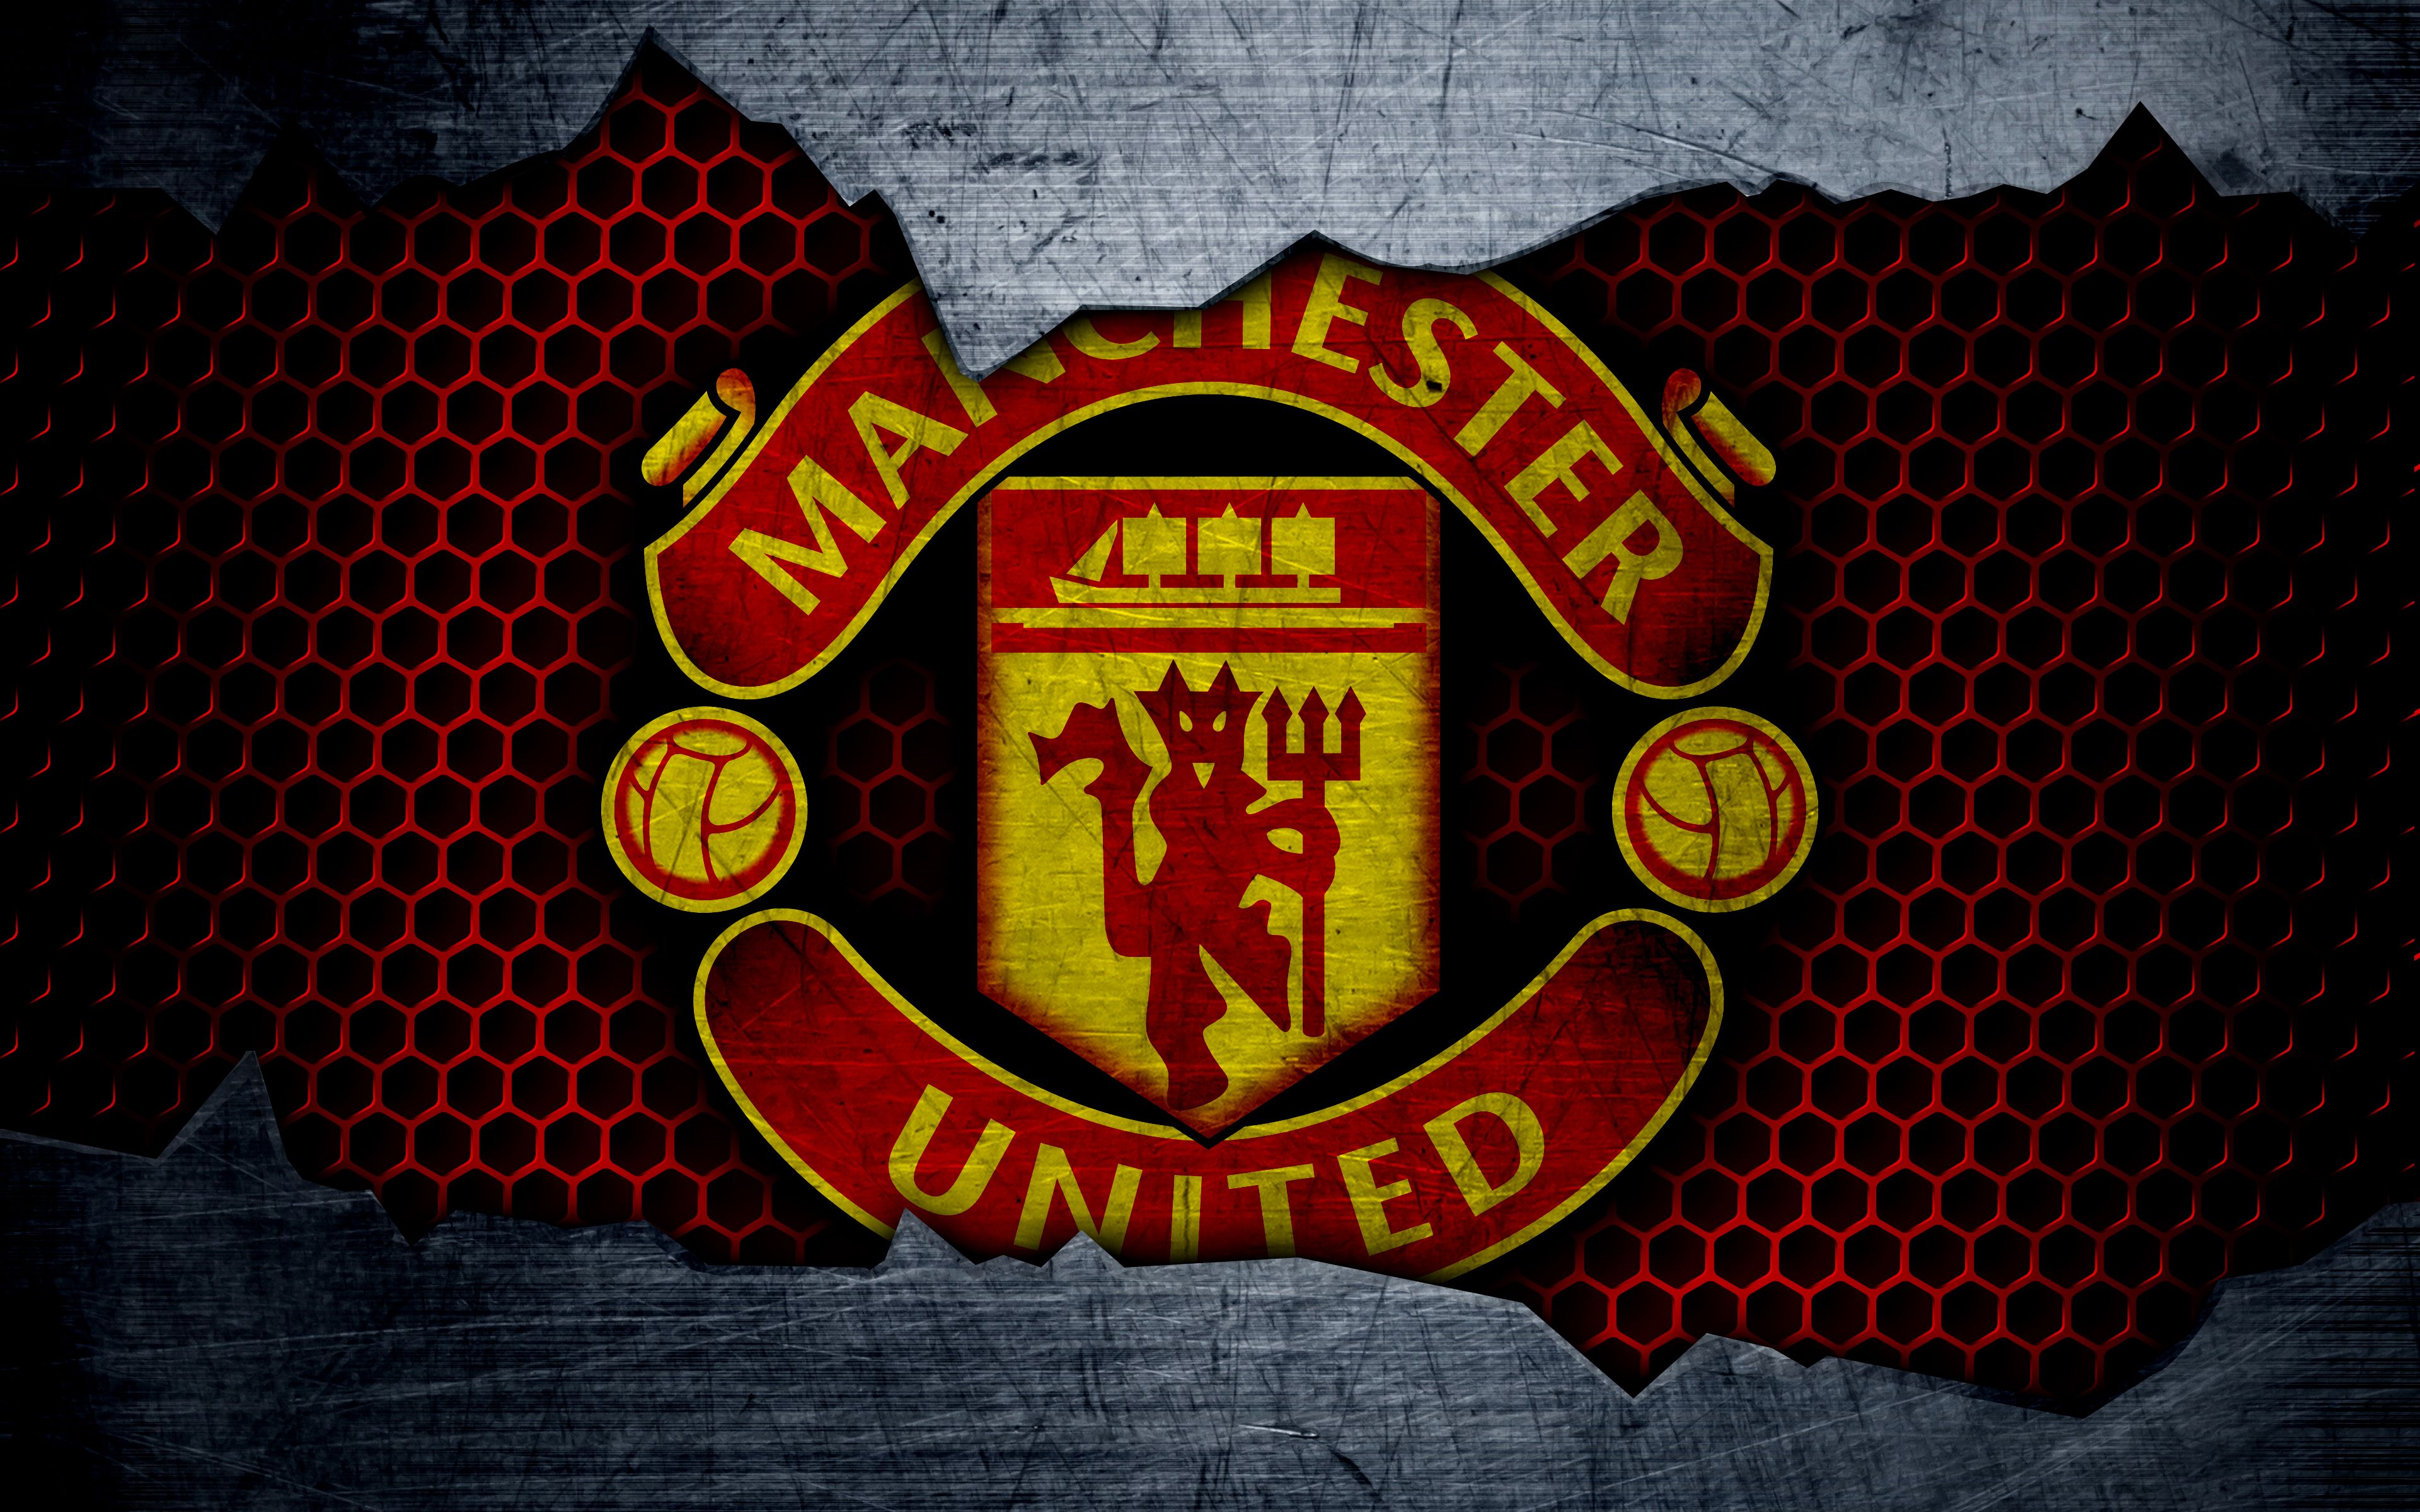 manchester inoted fc